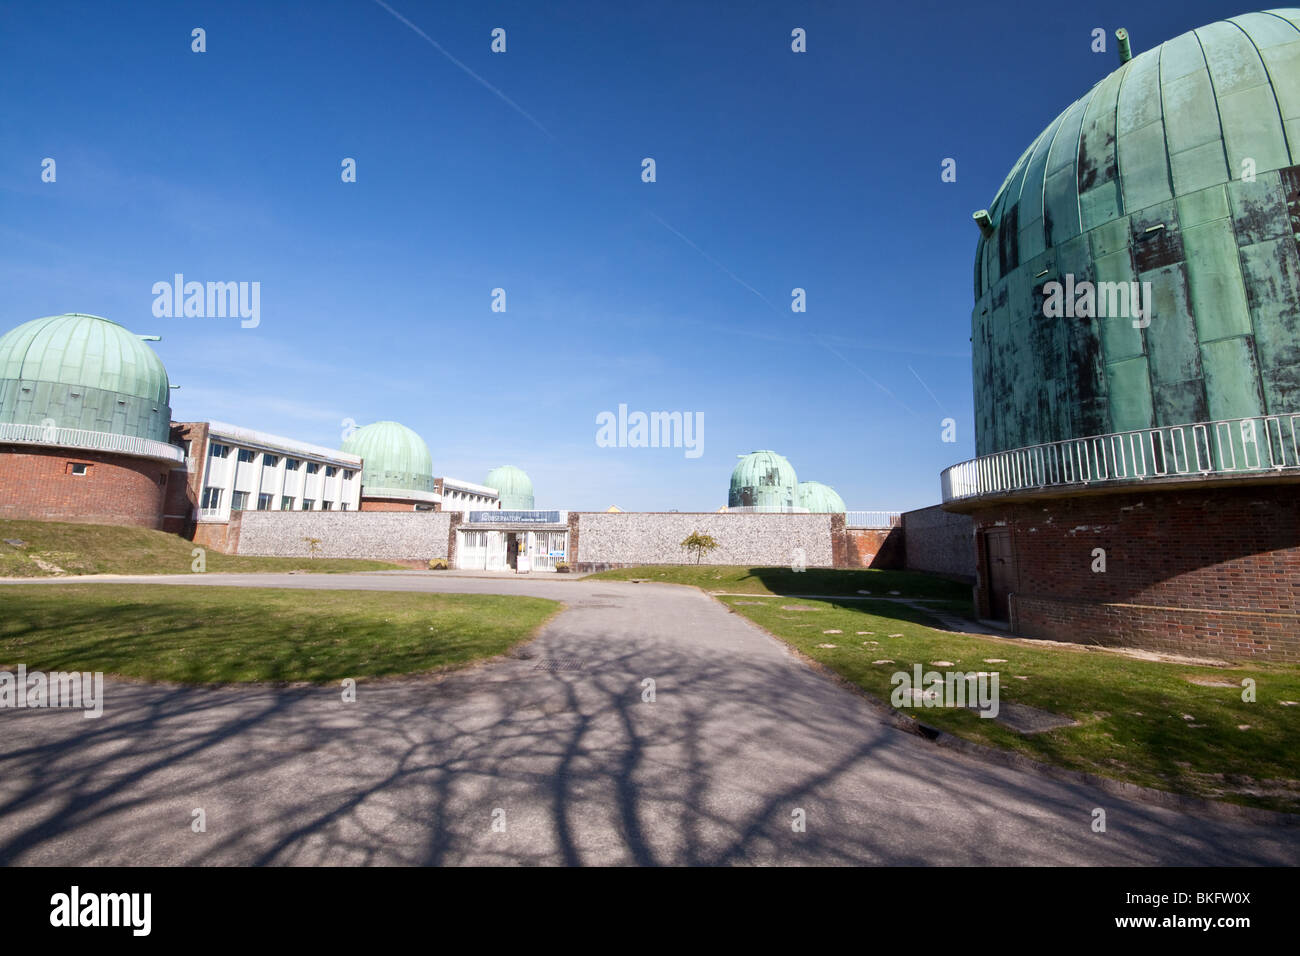 Domes at Herstmonceux Observatory, formerly part of the Royal Greenwich Observatory Stock Photo